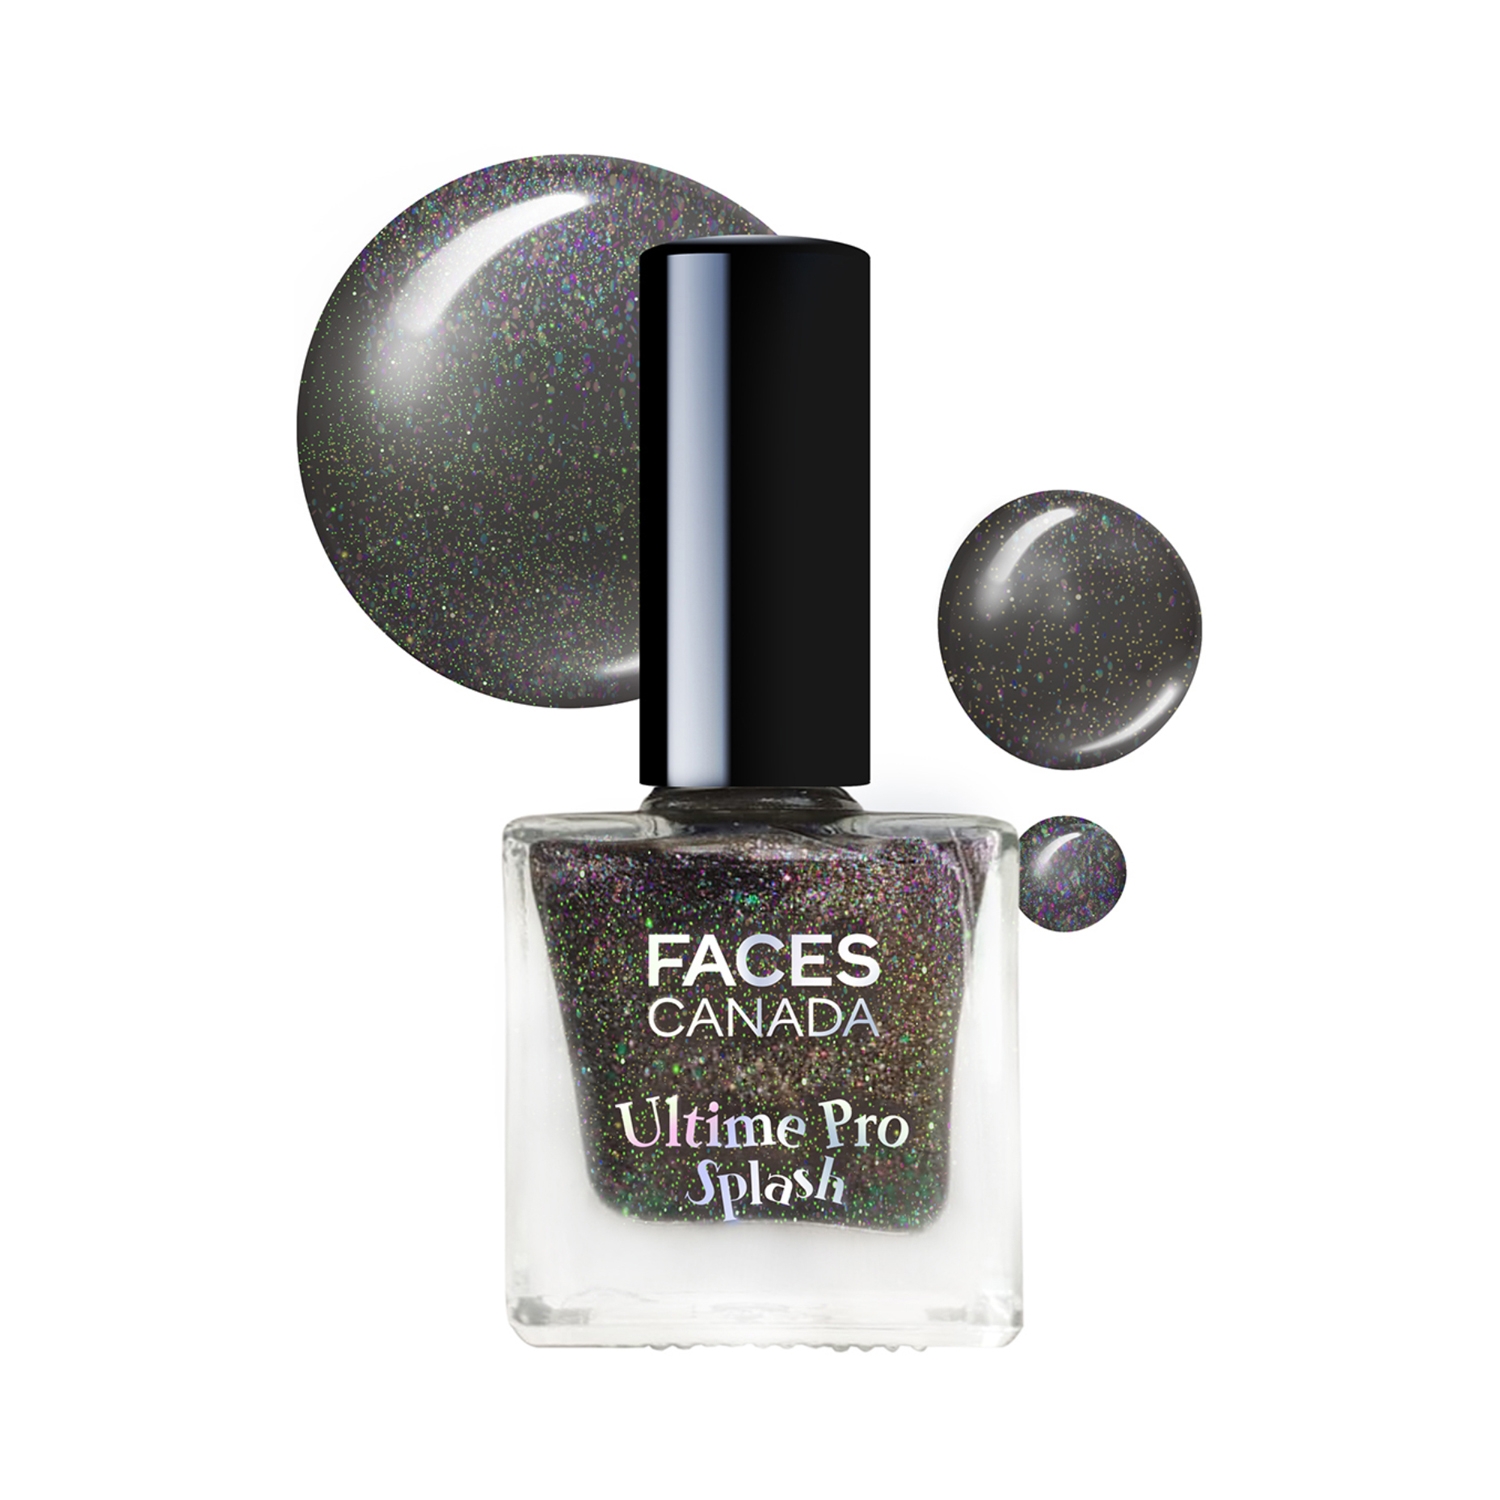 Faces Canada | Faces Canada Ultime Pro Splash Nail Enamel - A05 Starry Night (8ml)